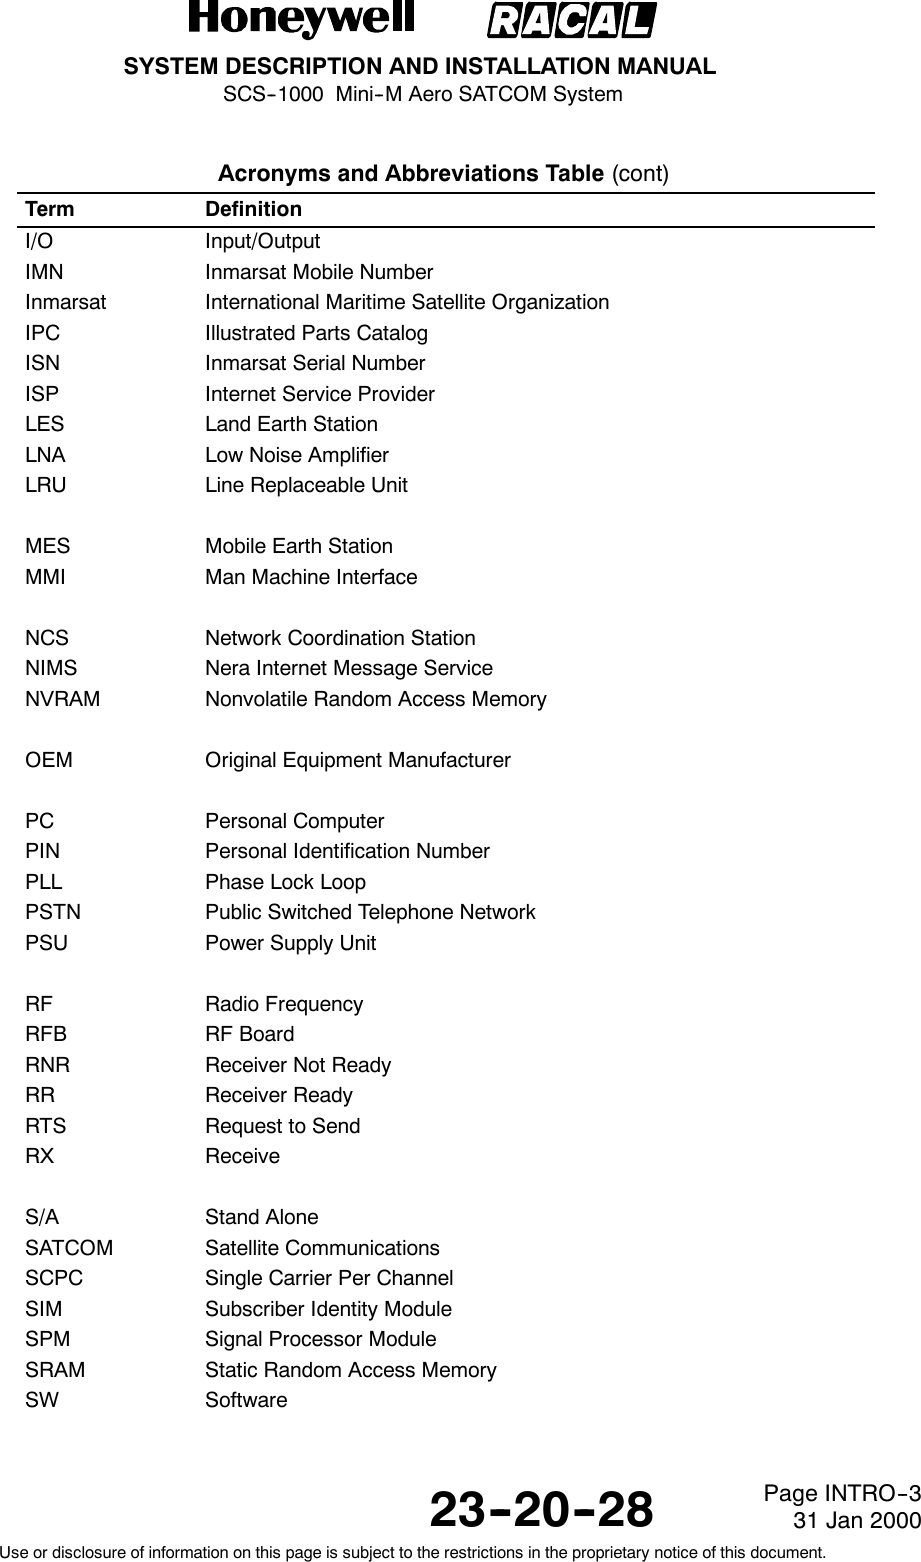 SYSTEM DESCRIPTION AND INSTALLATION MANUALSCS--1000 Mini--M Aero SATCOM System23--20--28Use or disclosure of information on this page is subject to the restrictions in the proprietary notice of this document.Page INTRO--331 Jan 2000Acronyms and Abbreviations Table (cont)Term DefinitionI/O Input/OutputIMN Inmarsat Mobile NumberInmarsat International Maritime Satellite OrganizationIPC Illustrated Parts CatalogISN Inmarsat Serial NumberISP Internet Service ProviderLES Land Earth StationLNA Low Noise AmplifierLRU Line Replaceable UnitMES Mobile Earth StationMMI Man Machine InterfaceNCS Network Coordination StationNIMS Nera Internet Message ServiceNVRAM Nonvolatile Random Access MemoryOEM Original Equipment ManufacturerPC Personal ComputerPIN Personal Identification NumberPLL Phase Lock LoopPSTN Public Switched Telephone NetworkPSU Power Supply UnitRF Radio FrequencyRFB RF BoardRNR Receiver Not ReadyRR Receiver ReadyRTS Request to SendRX ReceiveS/A Stand AloneSATCOM Satellite CommunicationsSCPC Single Carrier Per ChannelSIM Subscriber Identity ModuleSPM Signal Processor ModuleSRAM Static Random Access MemorySW Software